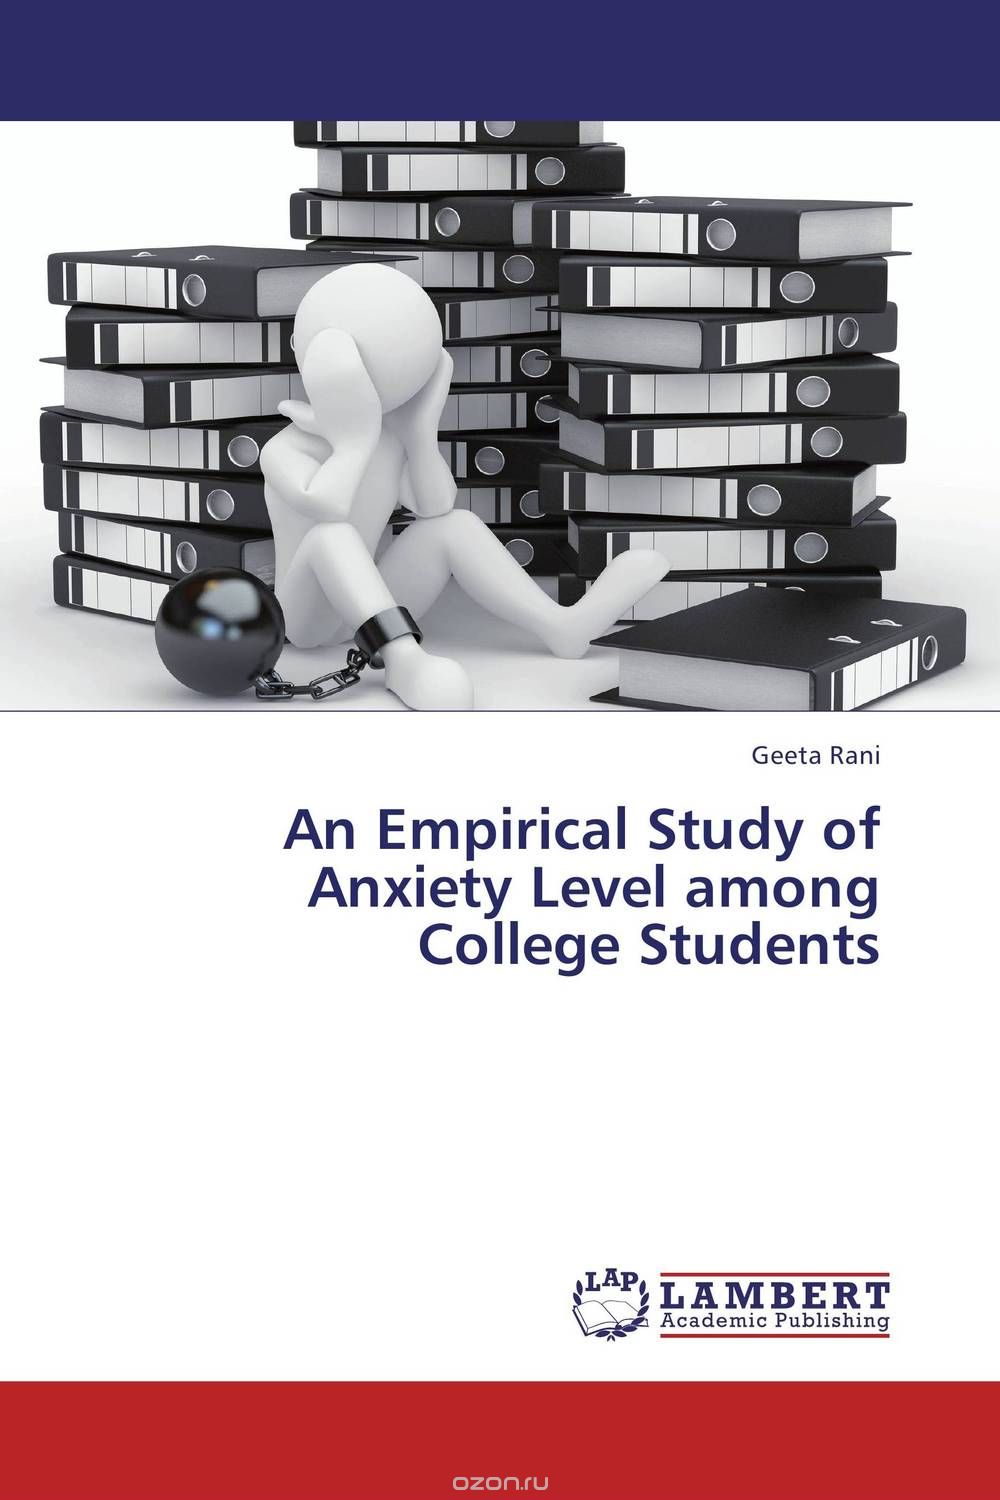 An Empirical Study of Anxiety Level among College Students